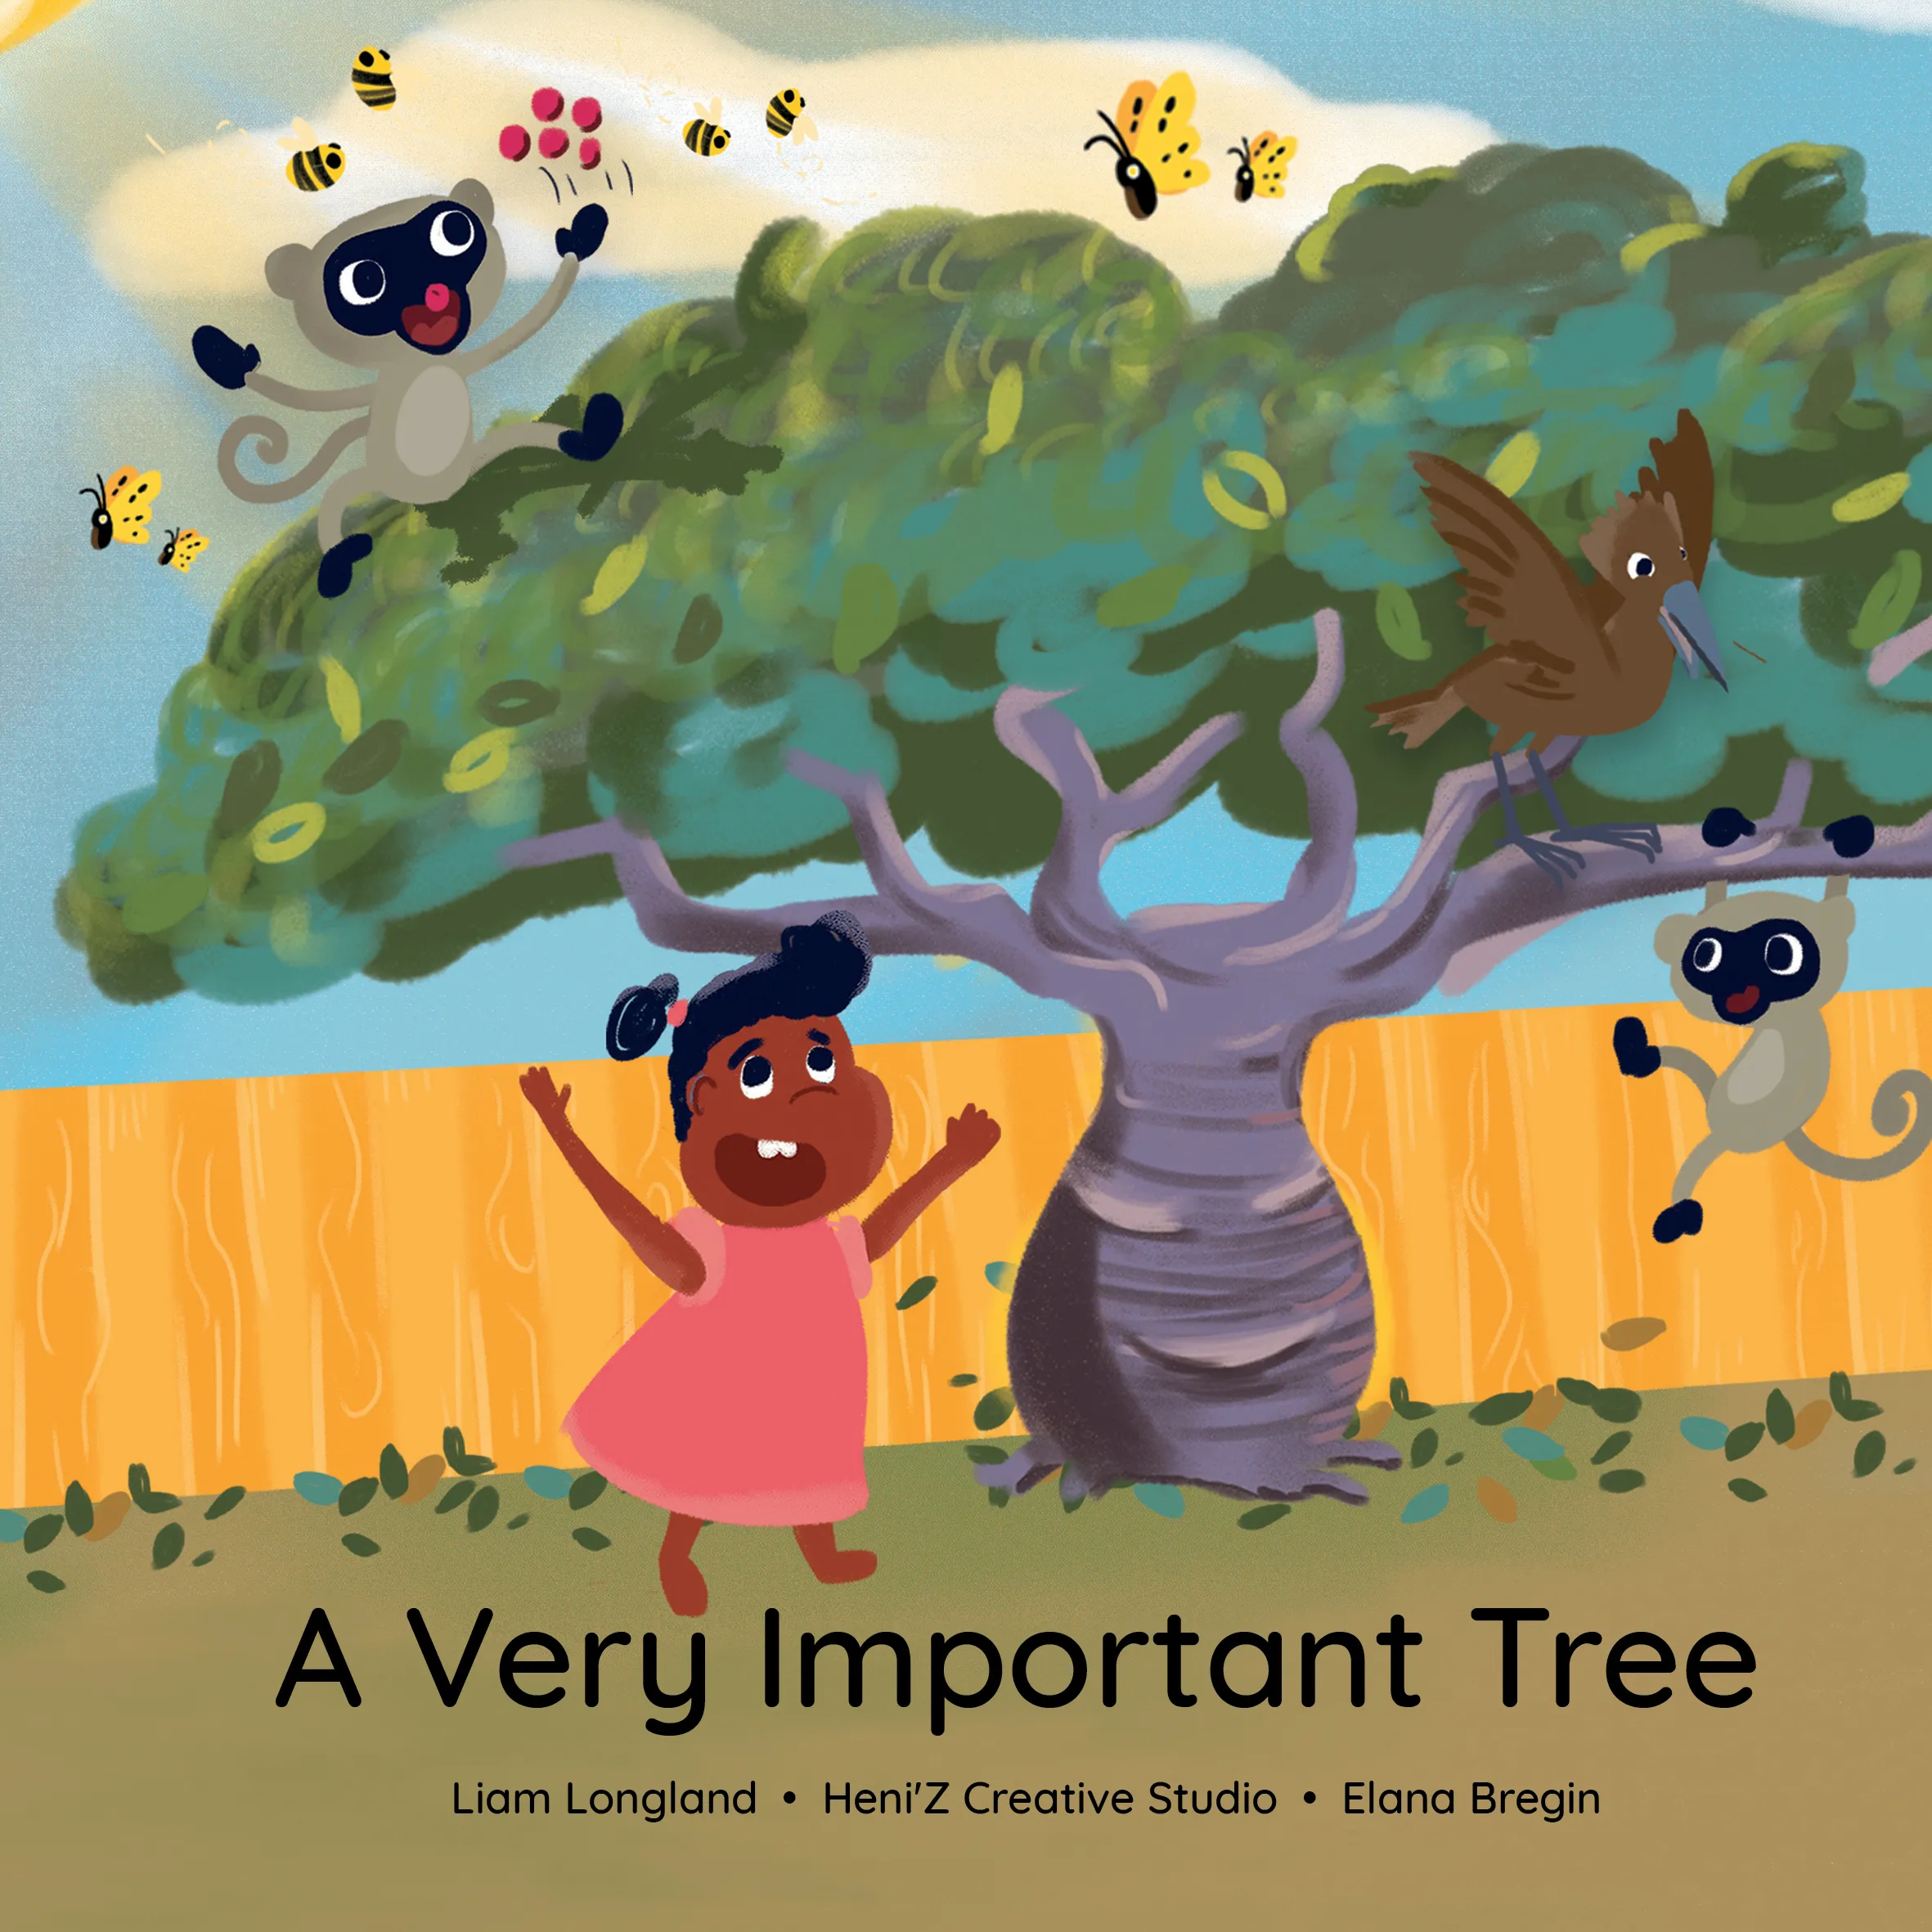 A Very Important Tree